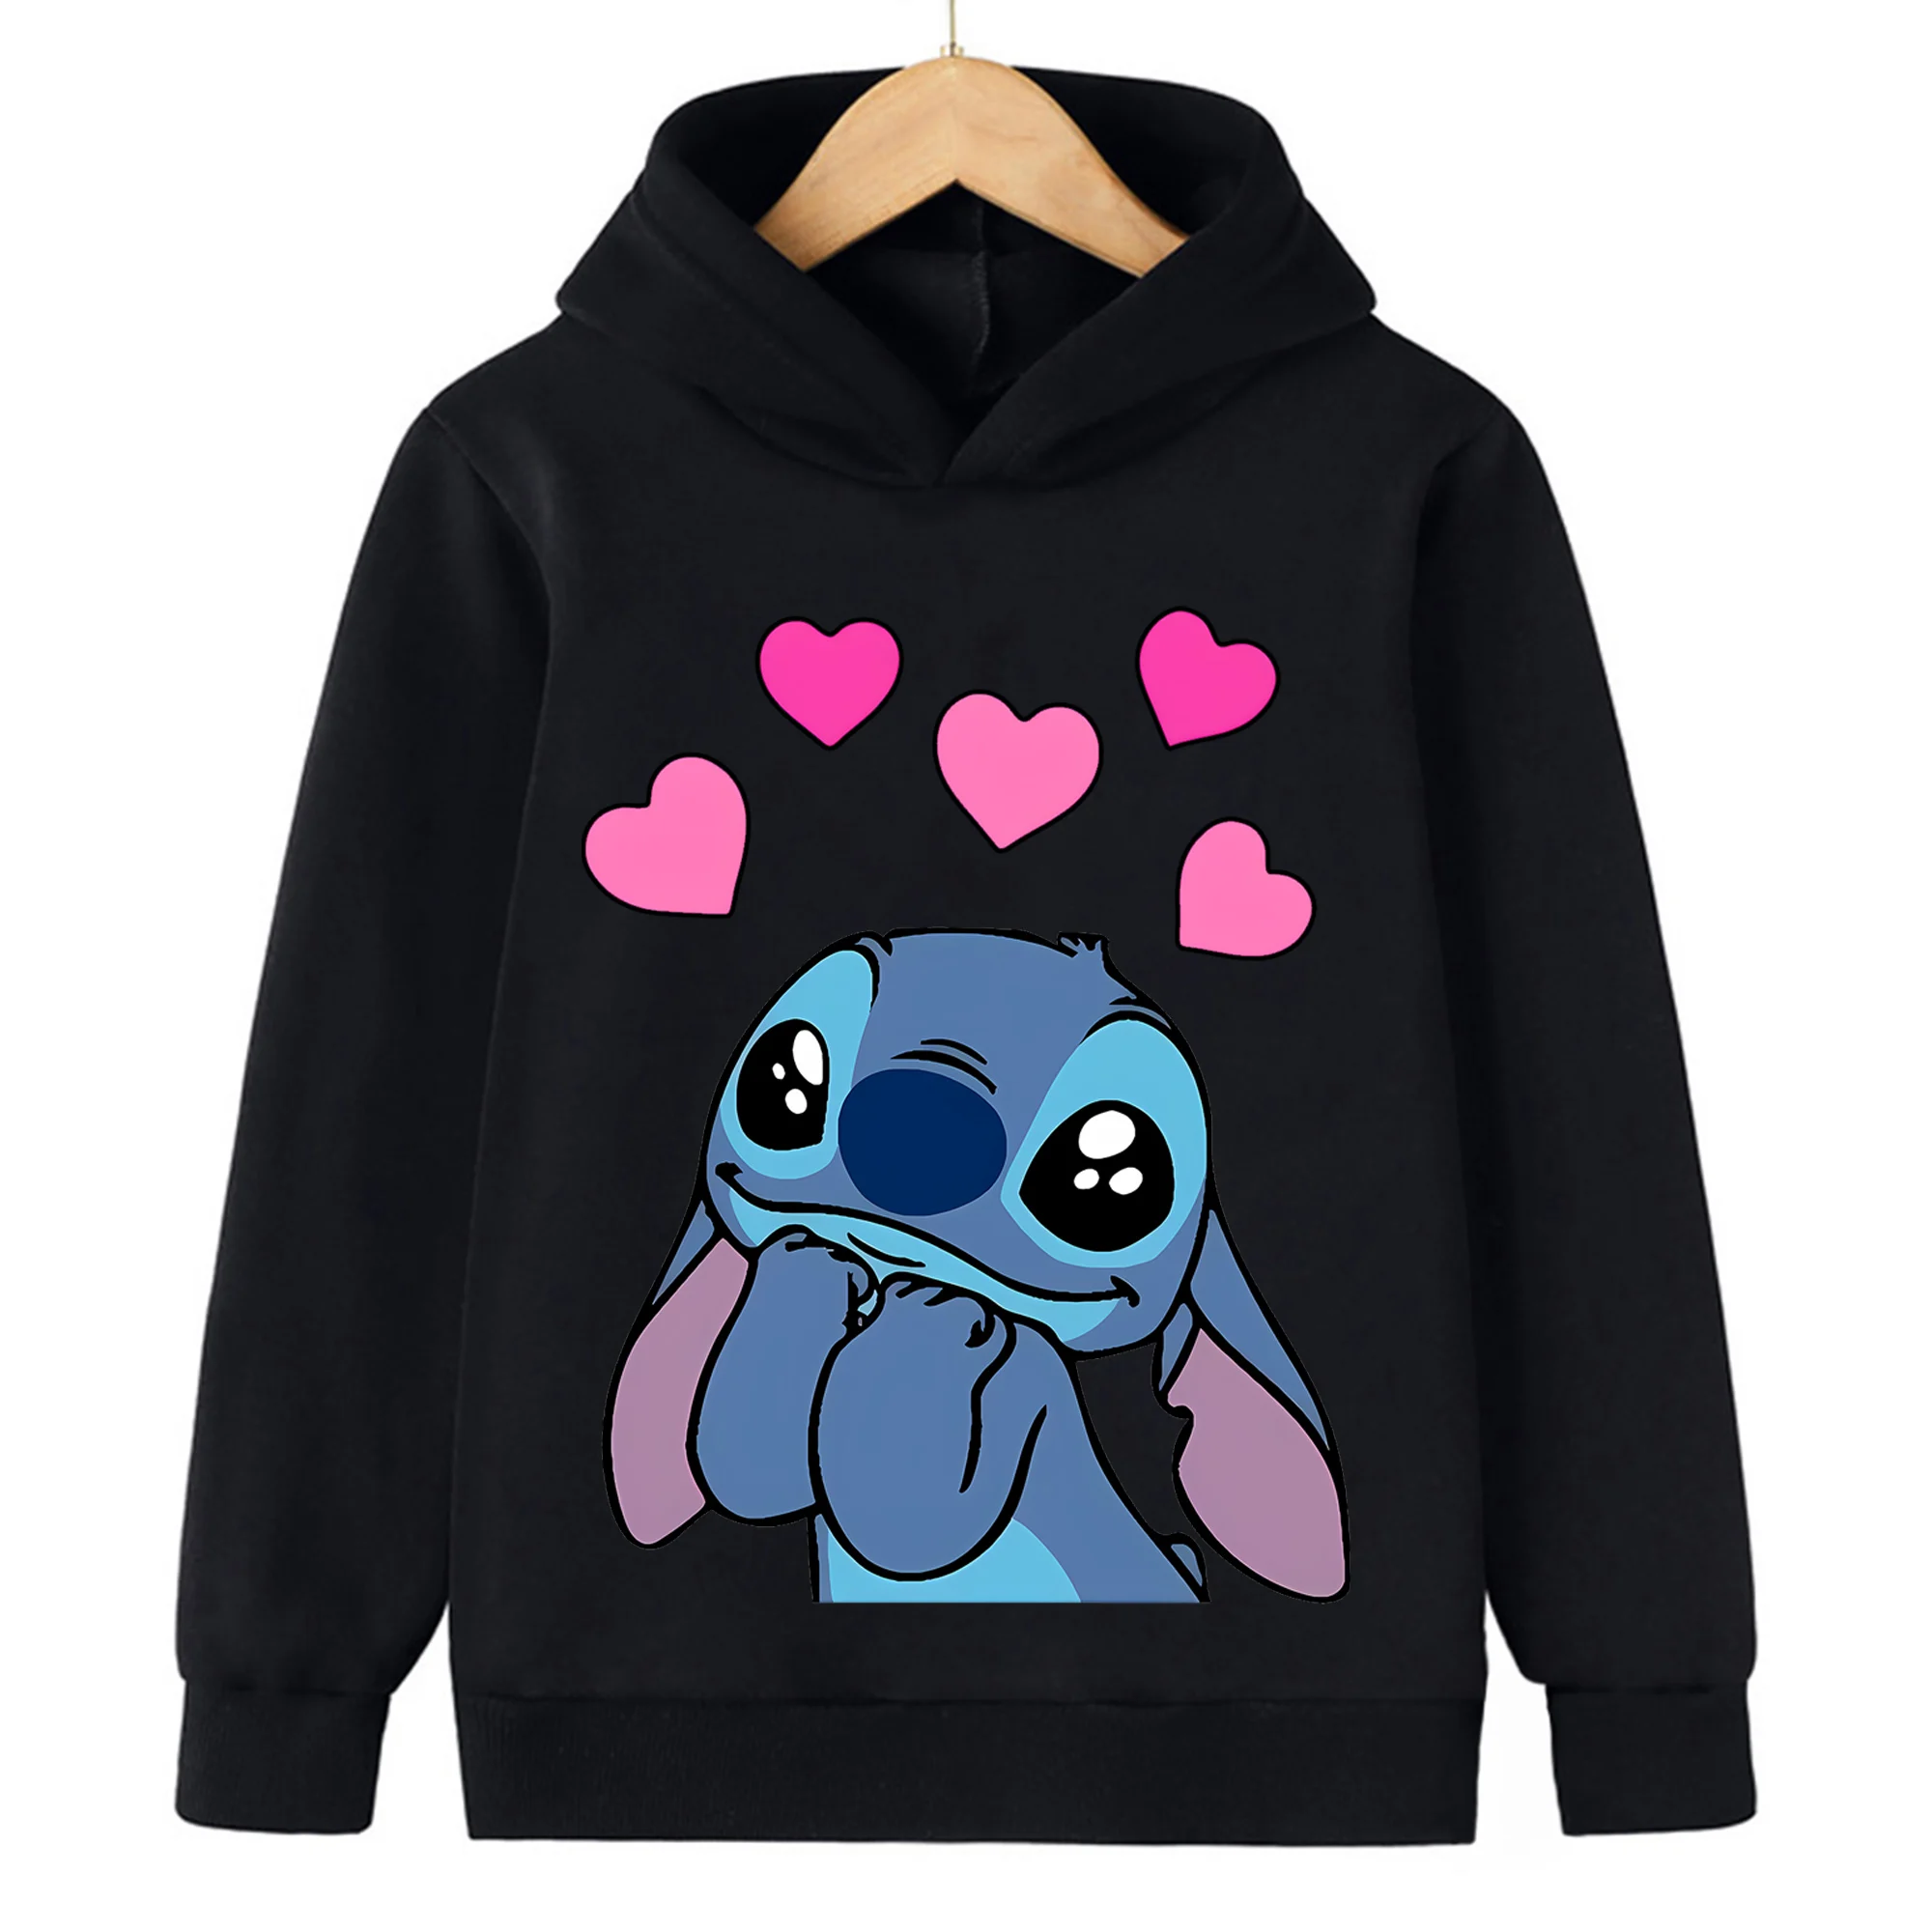 Girls Clothes Stitch Hoodies Sweatshirts Children's Clothing Sets Child Girl Tops + Pants 2 Pcs Suits Kids Boys Tracksuits Set-animated-img